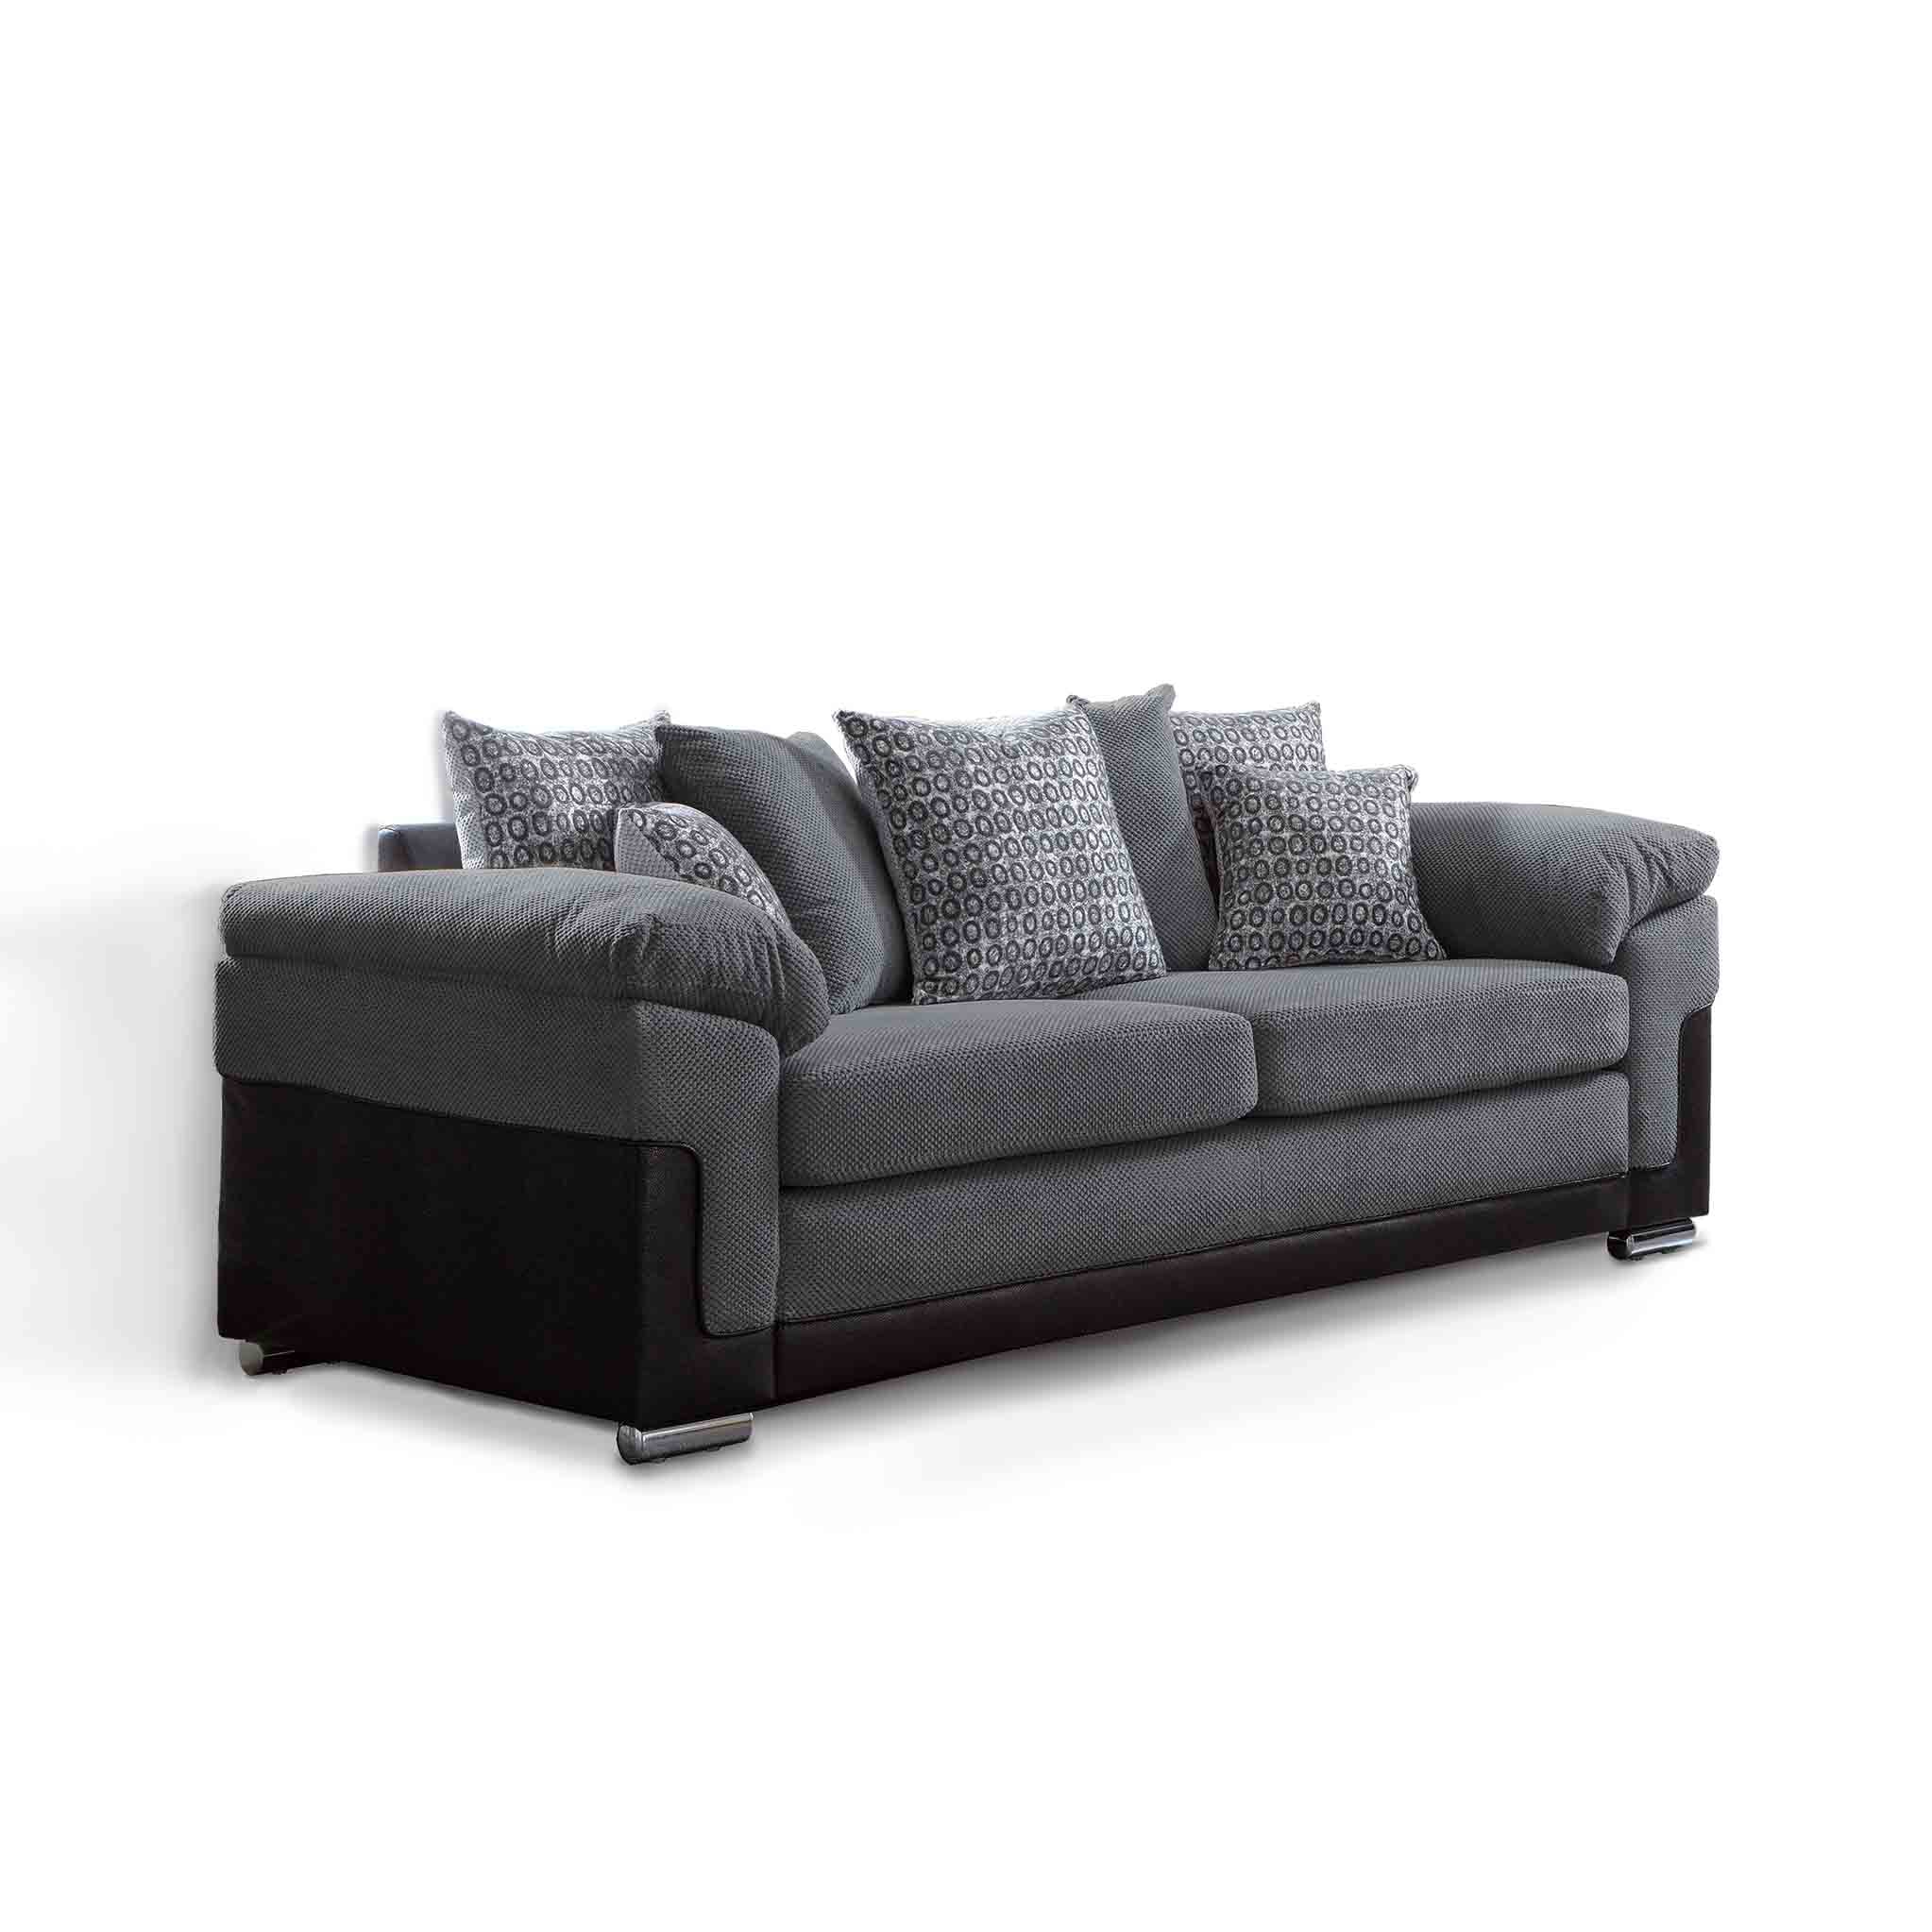 Ameba 3 Seater Fabric Faux Leather Sofa Charcoal Silver Comfy Upholstered Lawson Settee Couch With Cushion Arms